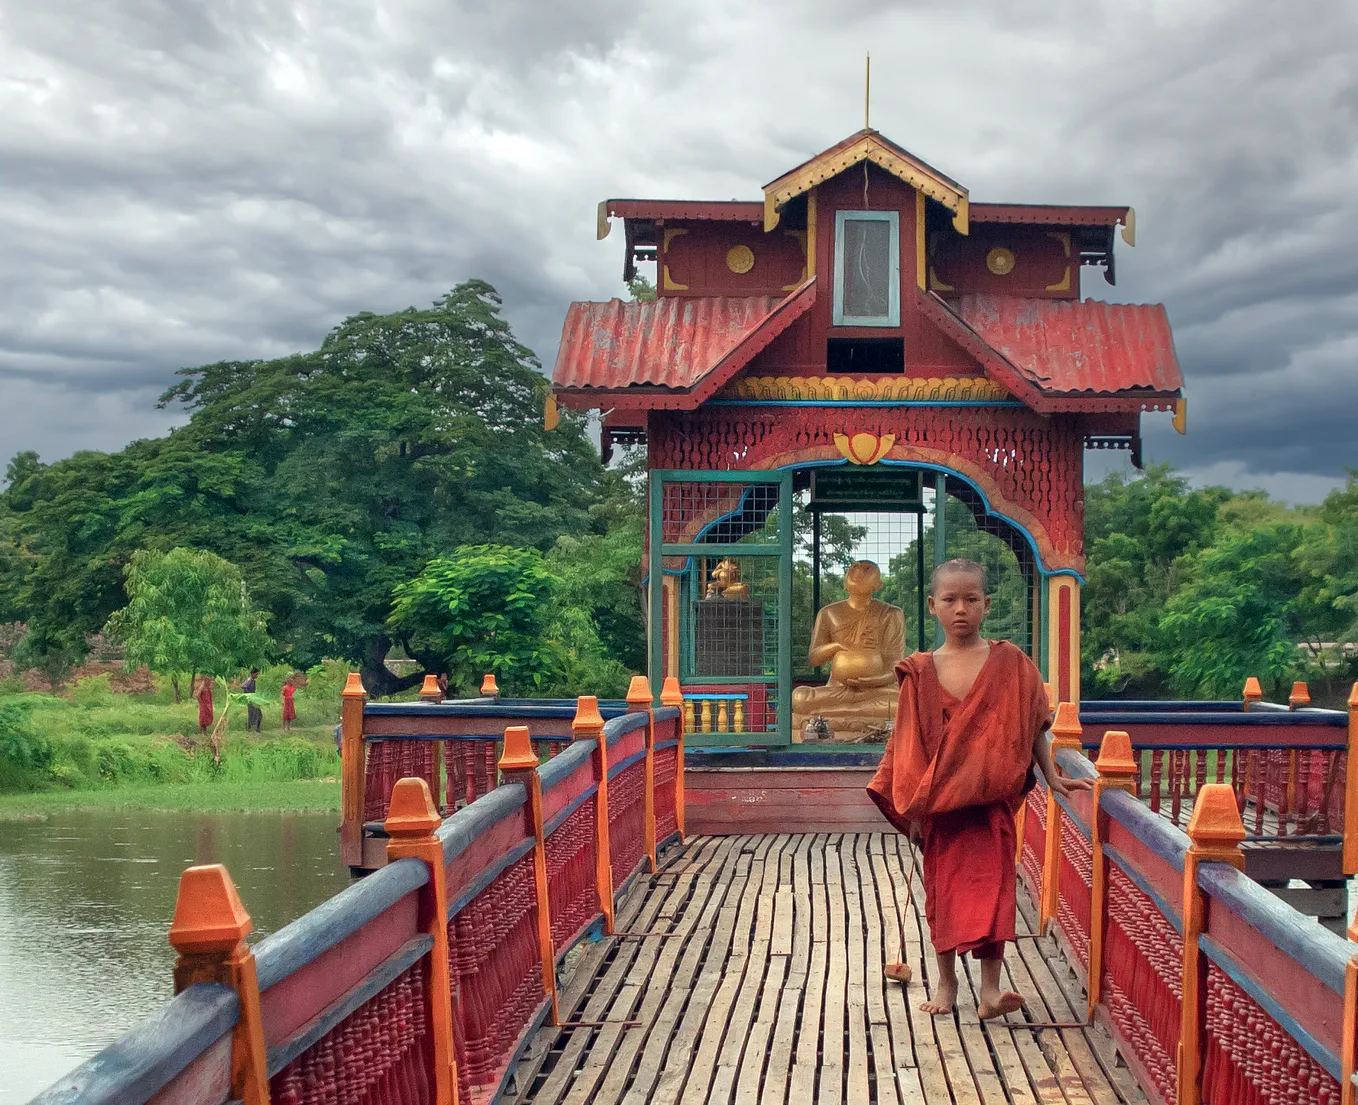 Young monk wearing an orange robe walks along a wooden bridge away from stupa where there is a golden Buddha sitting under the red titled roof.